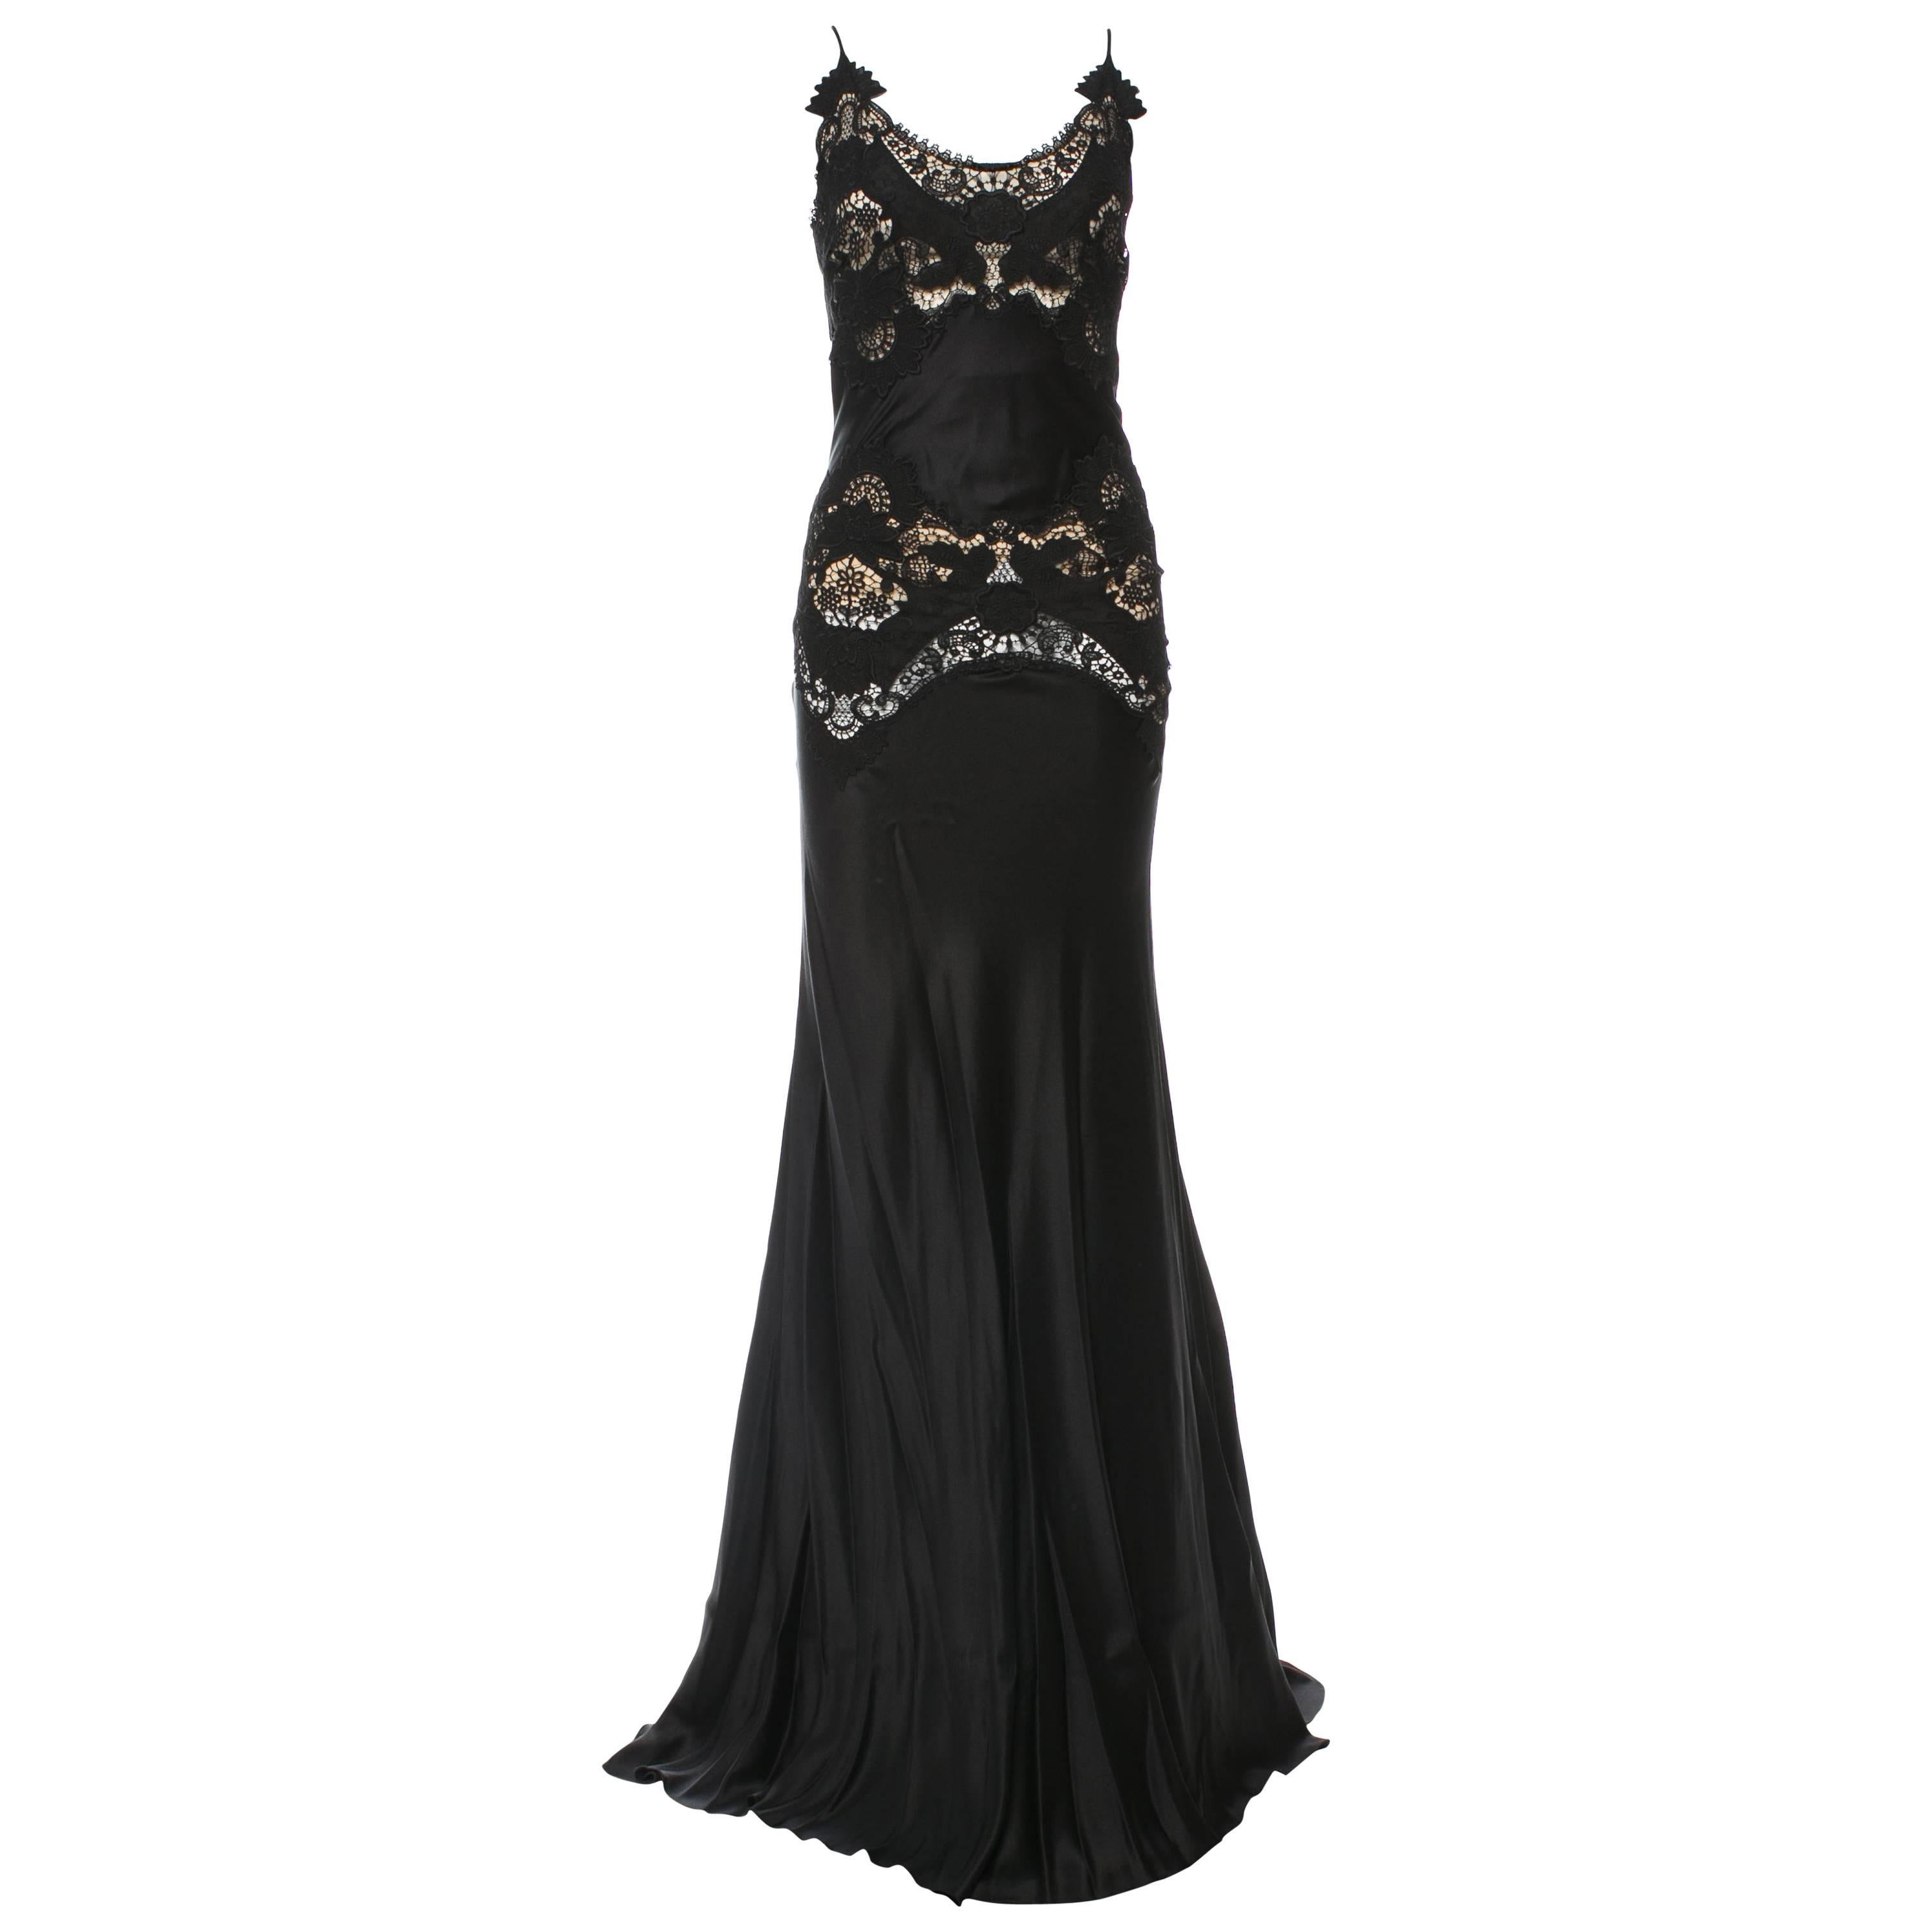 Alexander McQueen Black Evening Dress with Sheer Guipure Lace Details ...